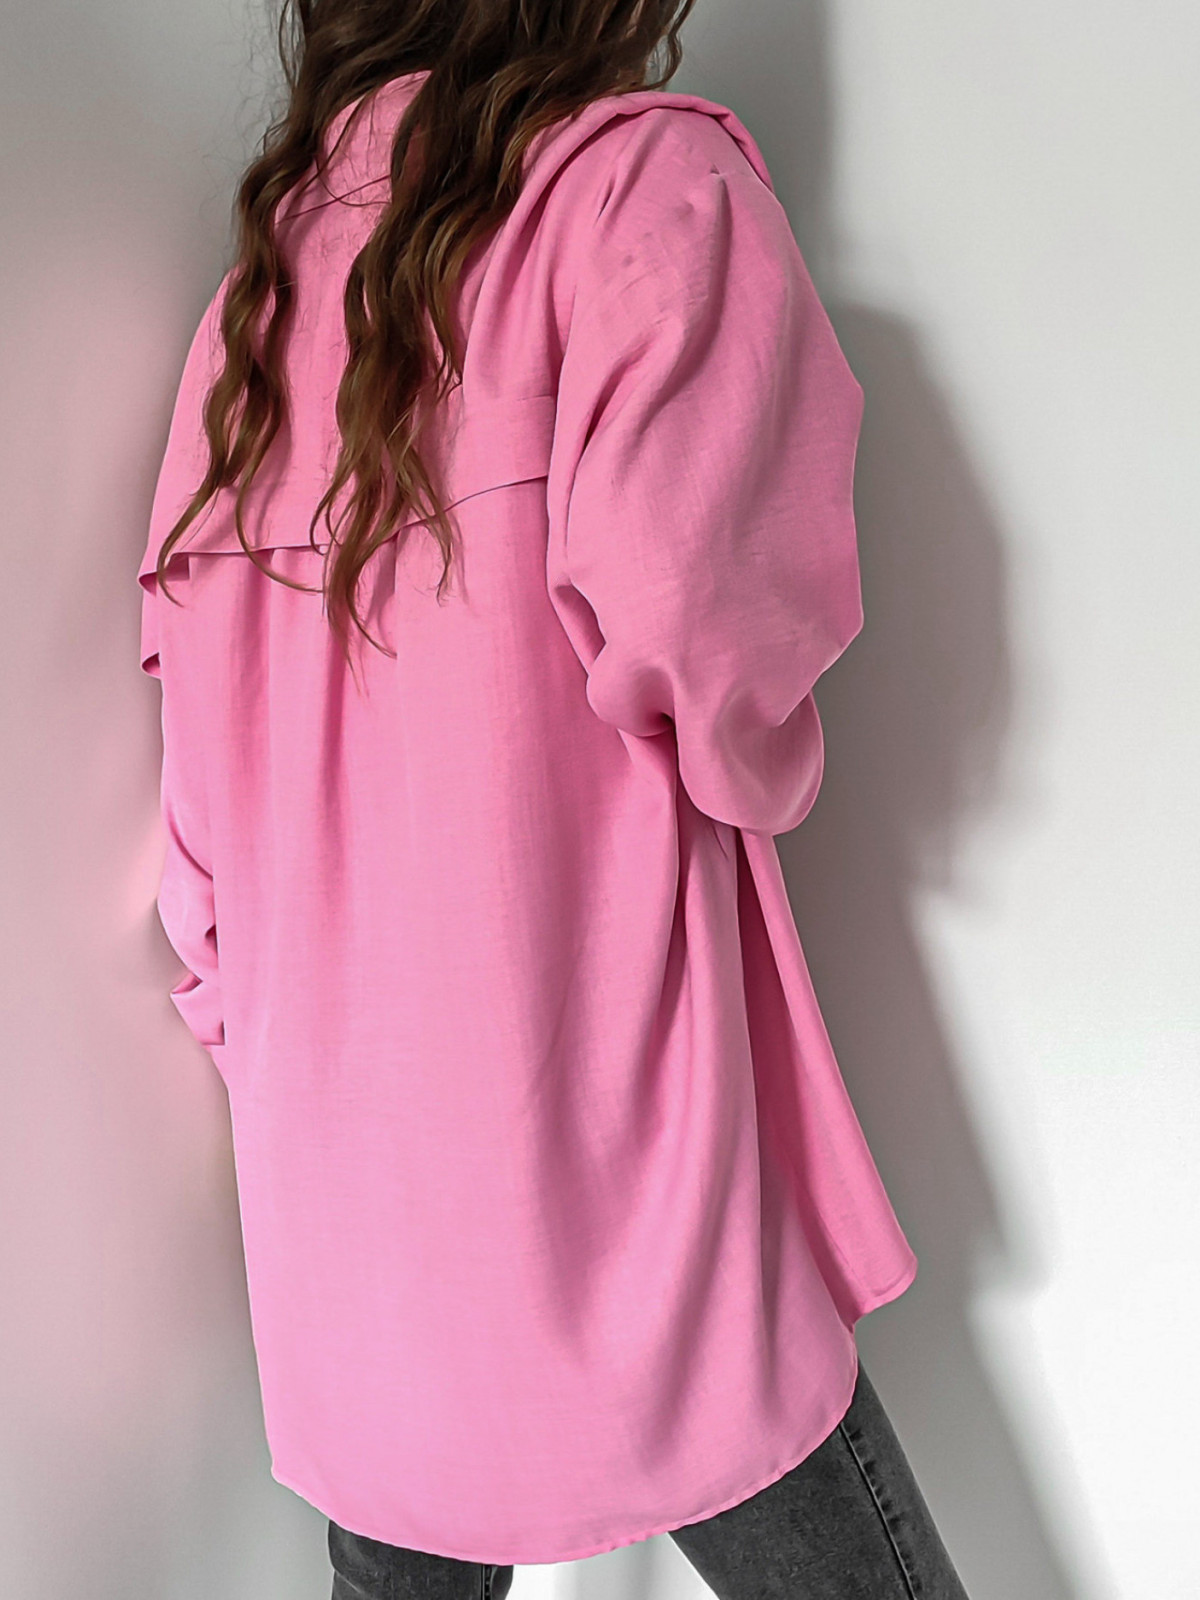 Tops, bodysuits and shirts - Pastel Pink Oversized Shirt Blouse Top Mila